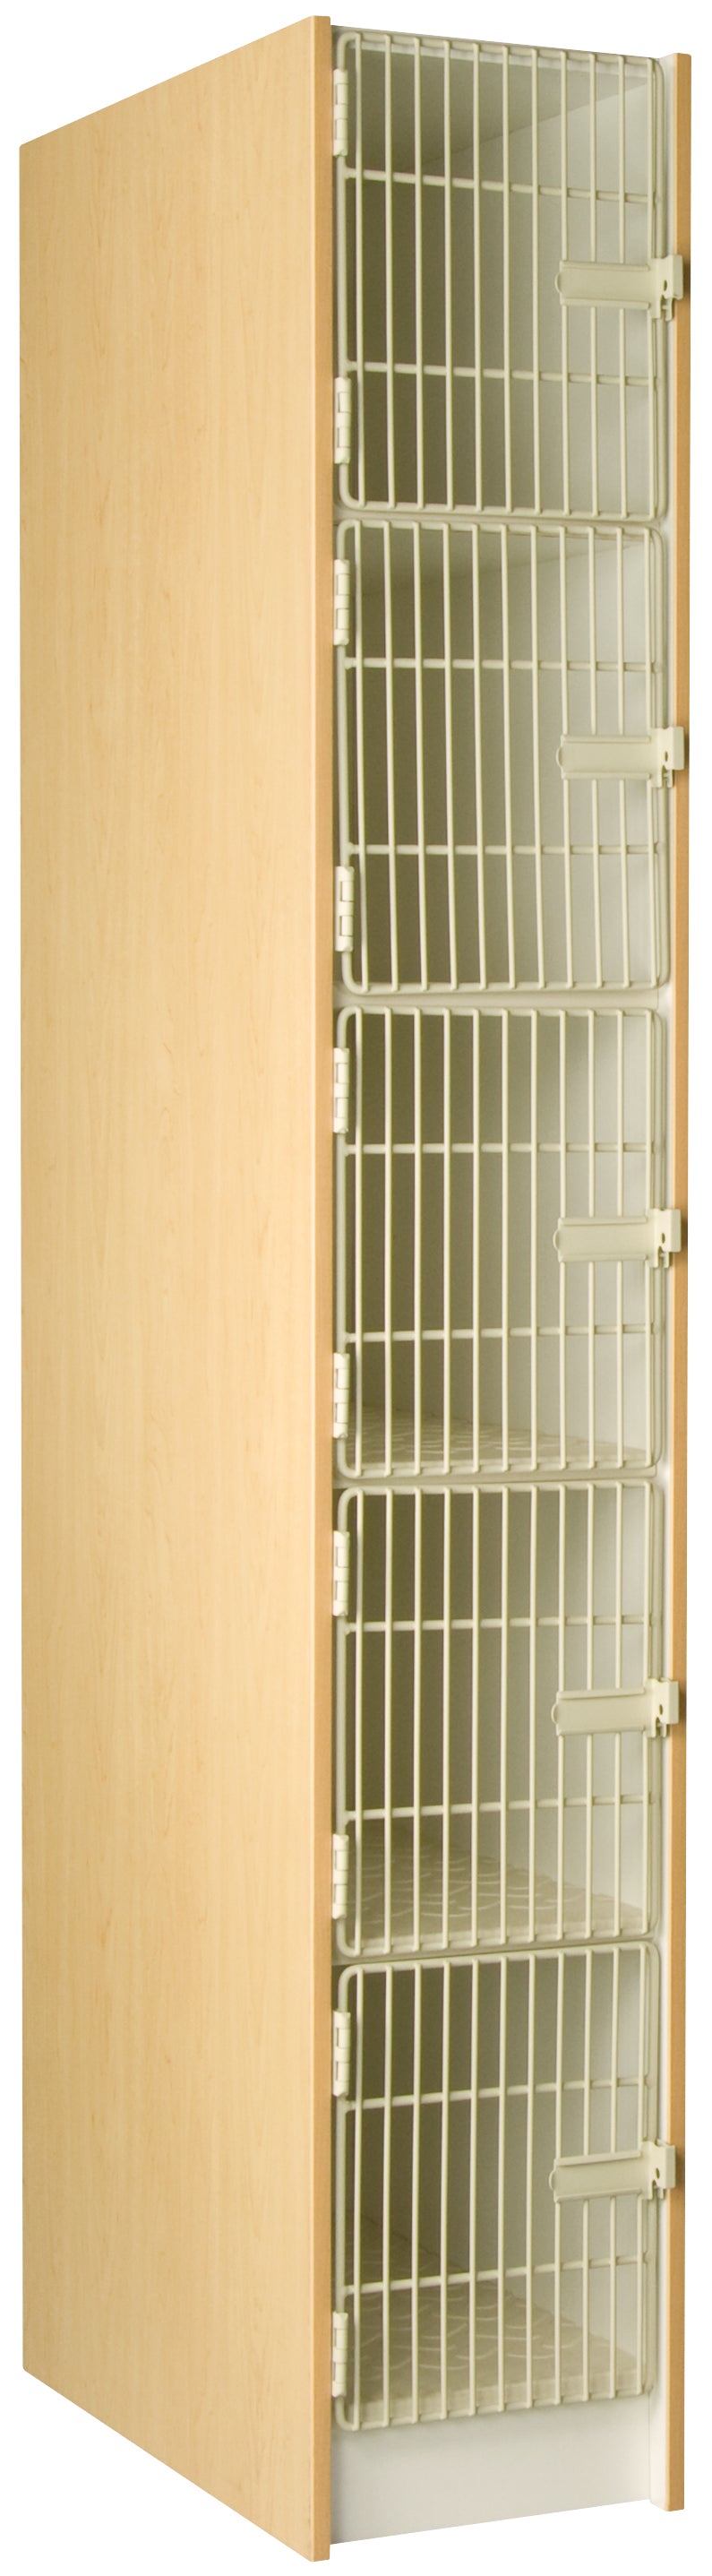 29" Deep Instrument Storage with Acousti-Grille Doors 89616 148429 A